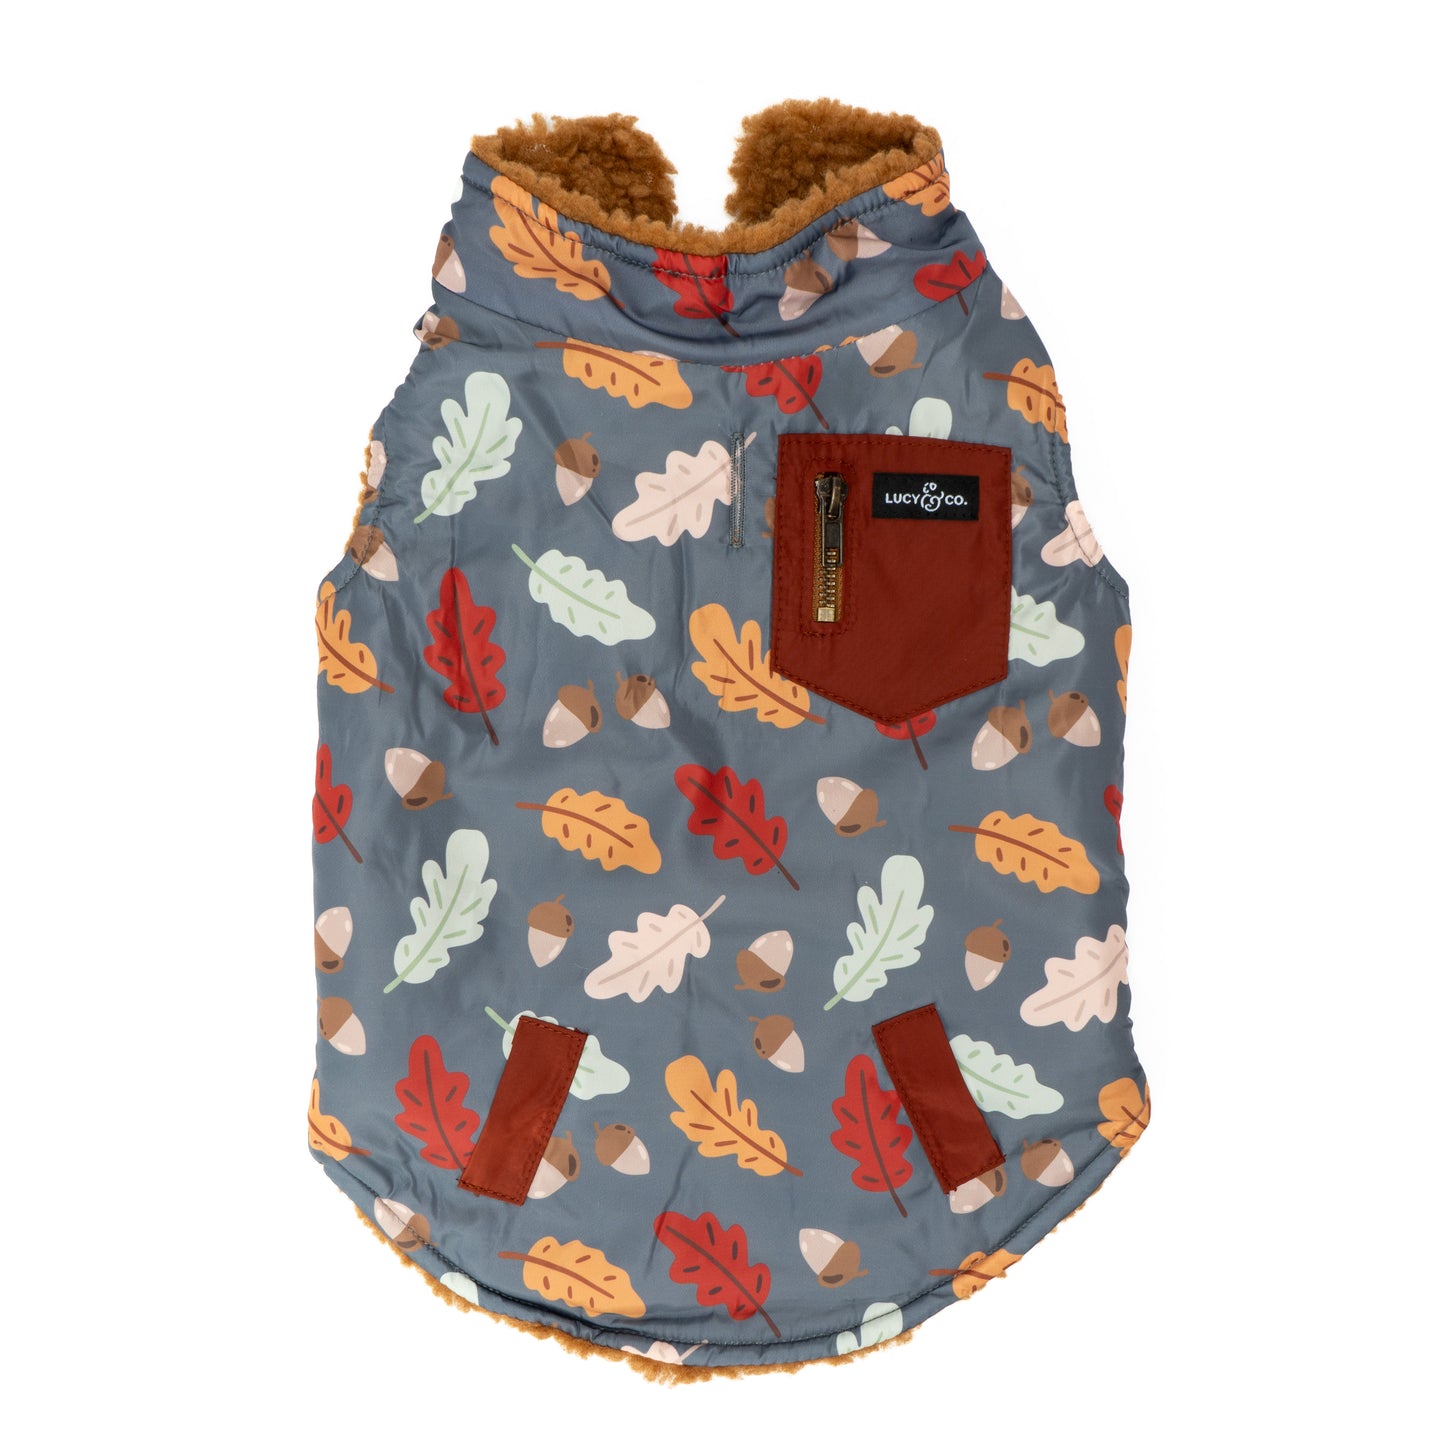 The Unbeleafable Reversible Teddy Vest